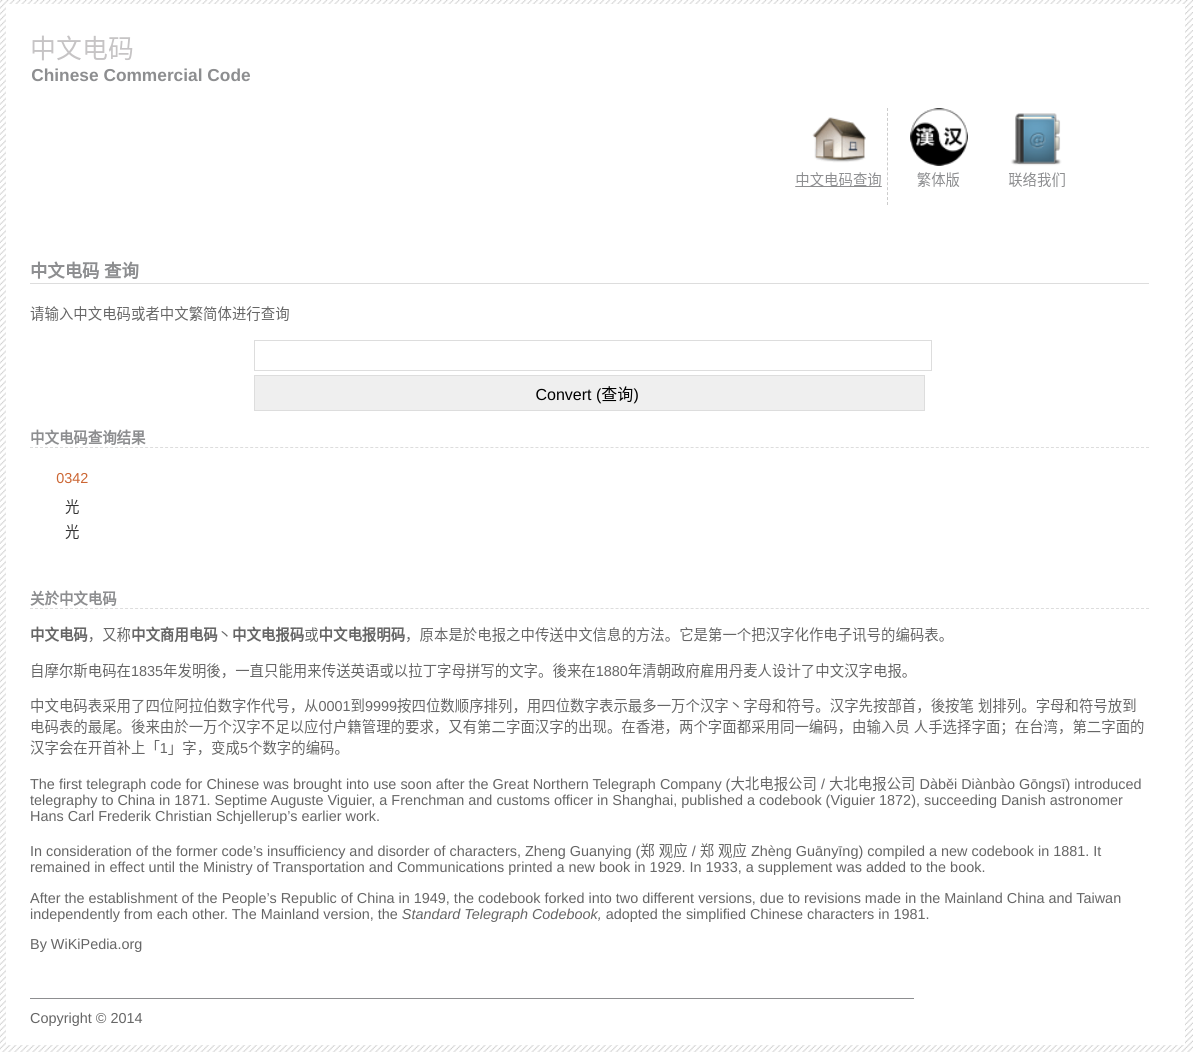 http://chinesecommercialcode.net/search/index/cn